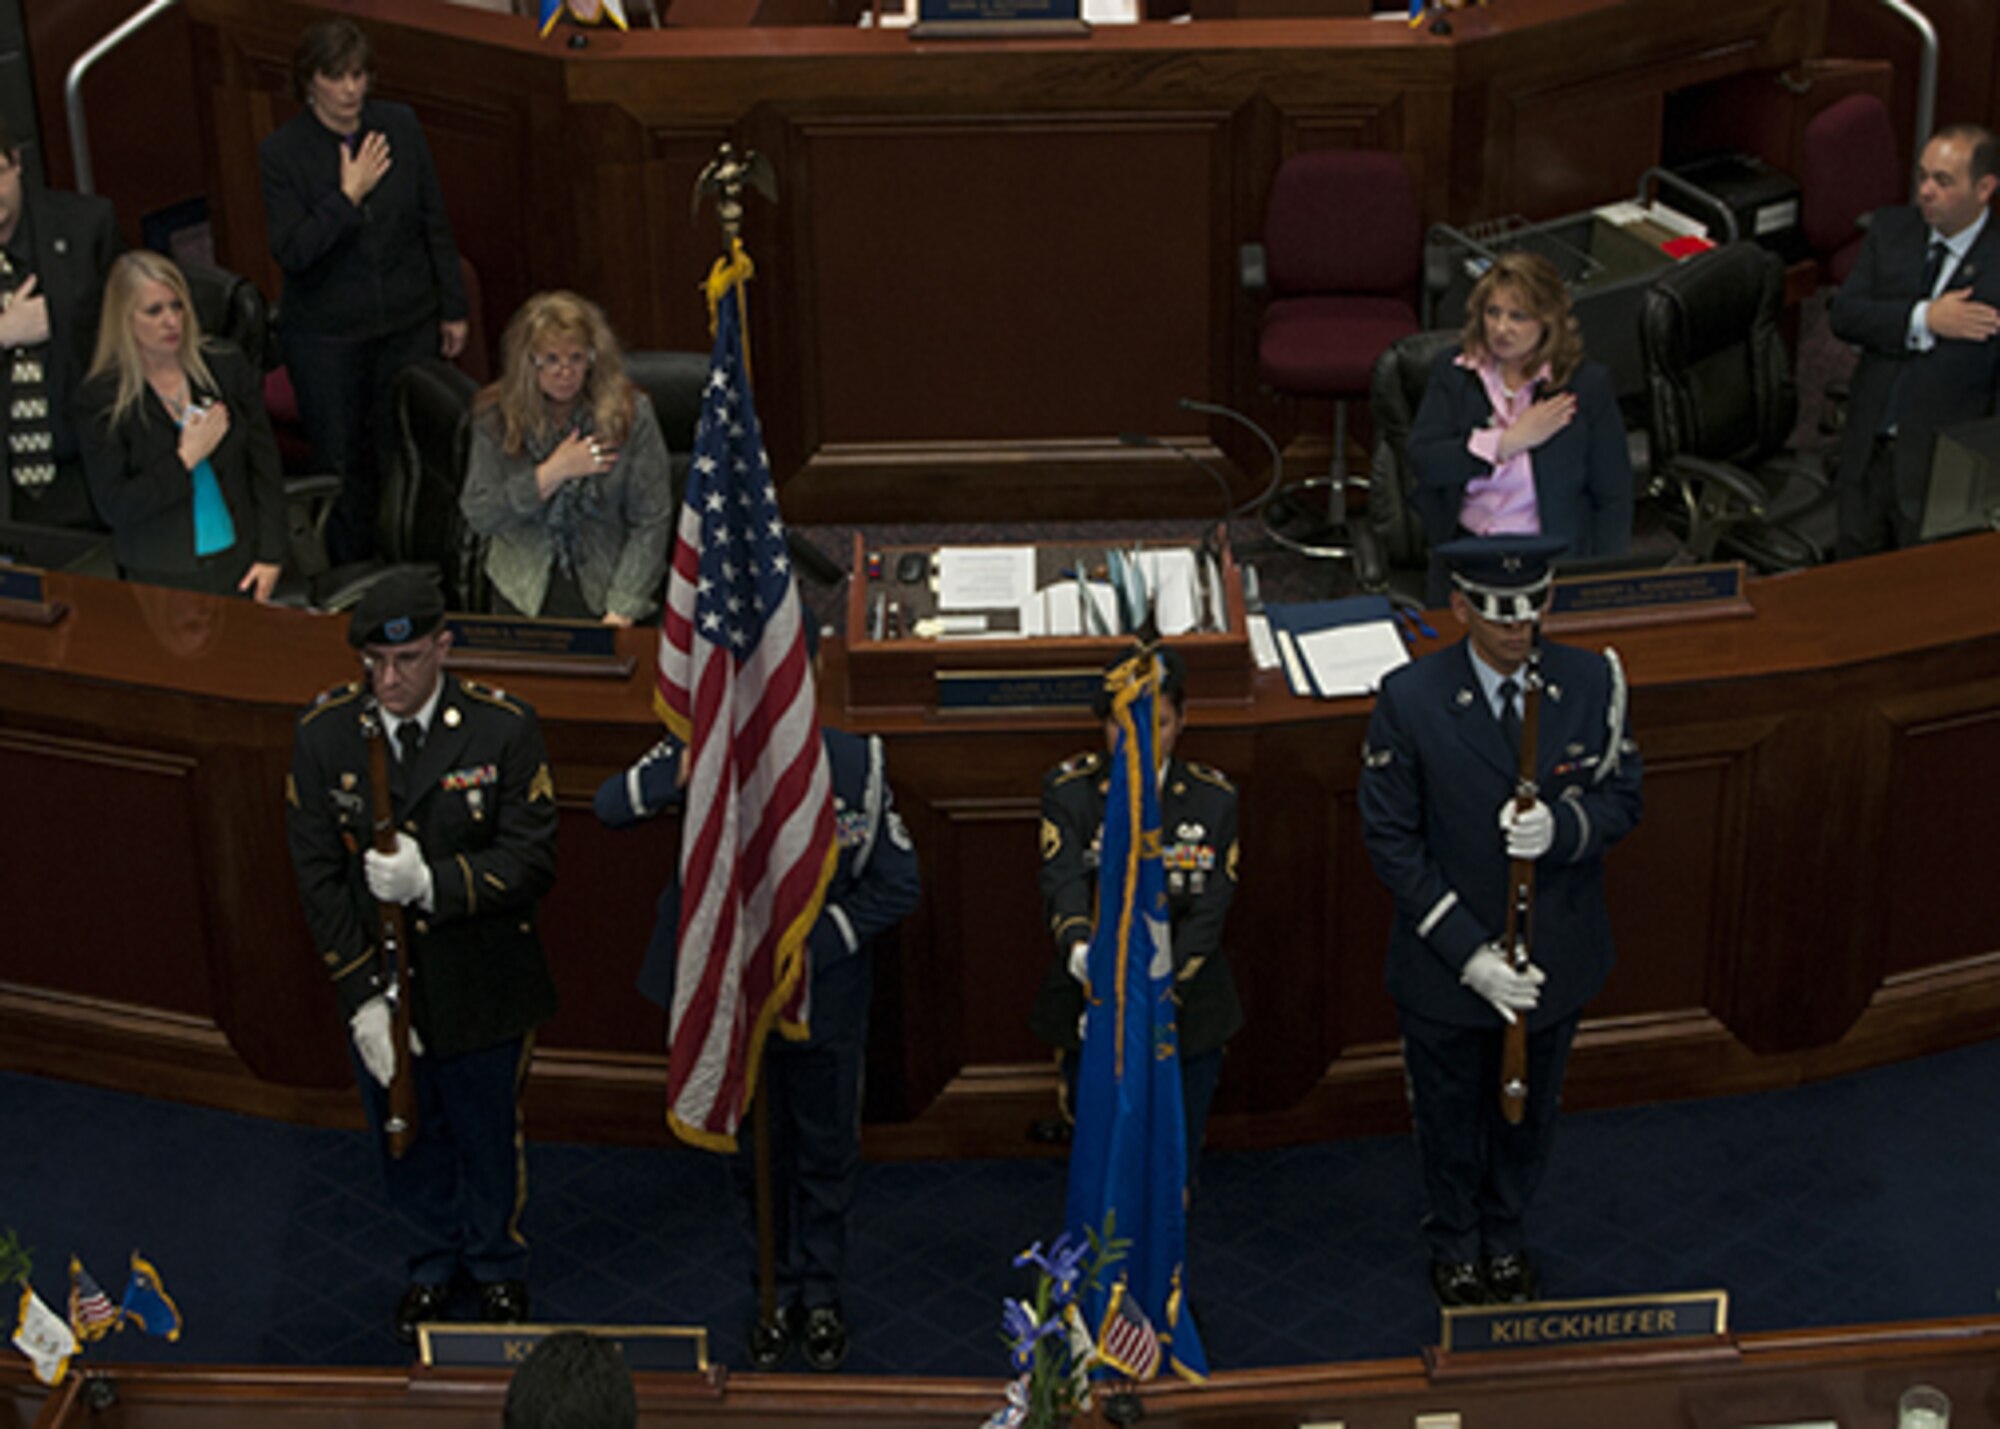 (From left) Sgt. Robert Green, Master Sgt. Suzanne Connell, Staff Sgt. Rose Kemp and Airman 1st Class David Almada at the opening ceremonies for Nevada’s 78th Legislative Session in the Senate Chambers, Carson City on Feb. 2nd just after noon. The Guardsman formed a joint color guard to represent the Nevada National Guard for the ceremony.

Photo by Staff Sgt. Mike Getten, Joint Force Headquarters Public Affairs.
